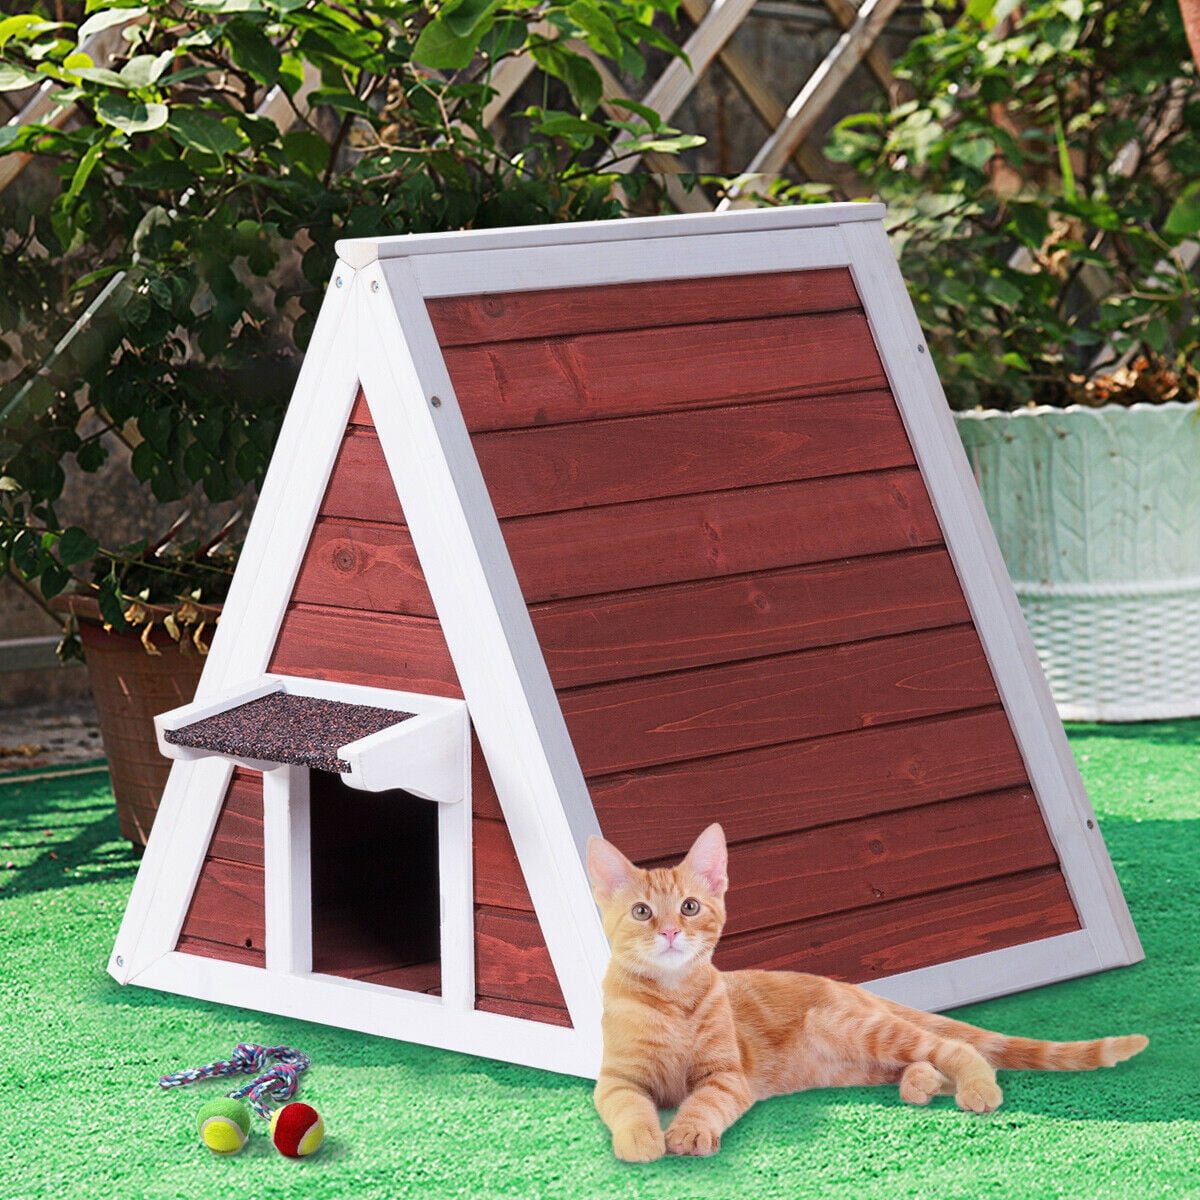 Gymax A Frame Outdoor Cat House Brown 21 in Walmart 